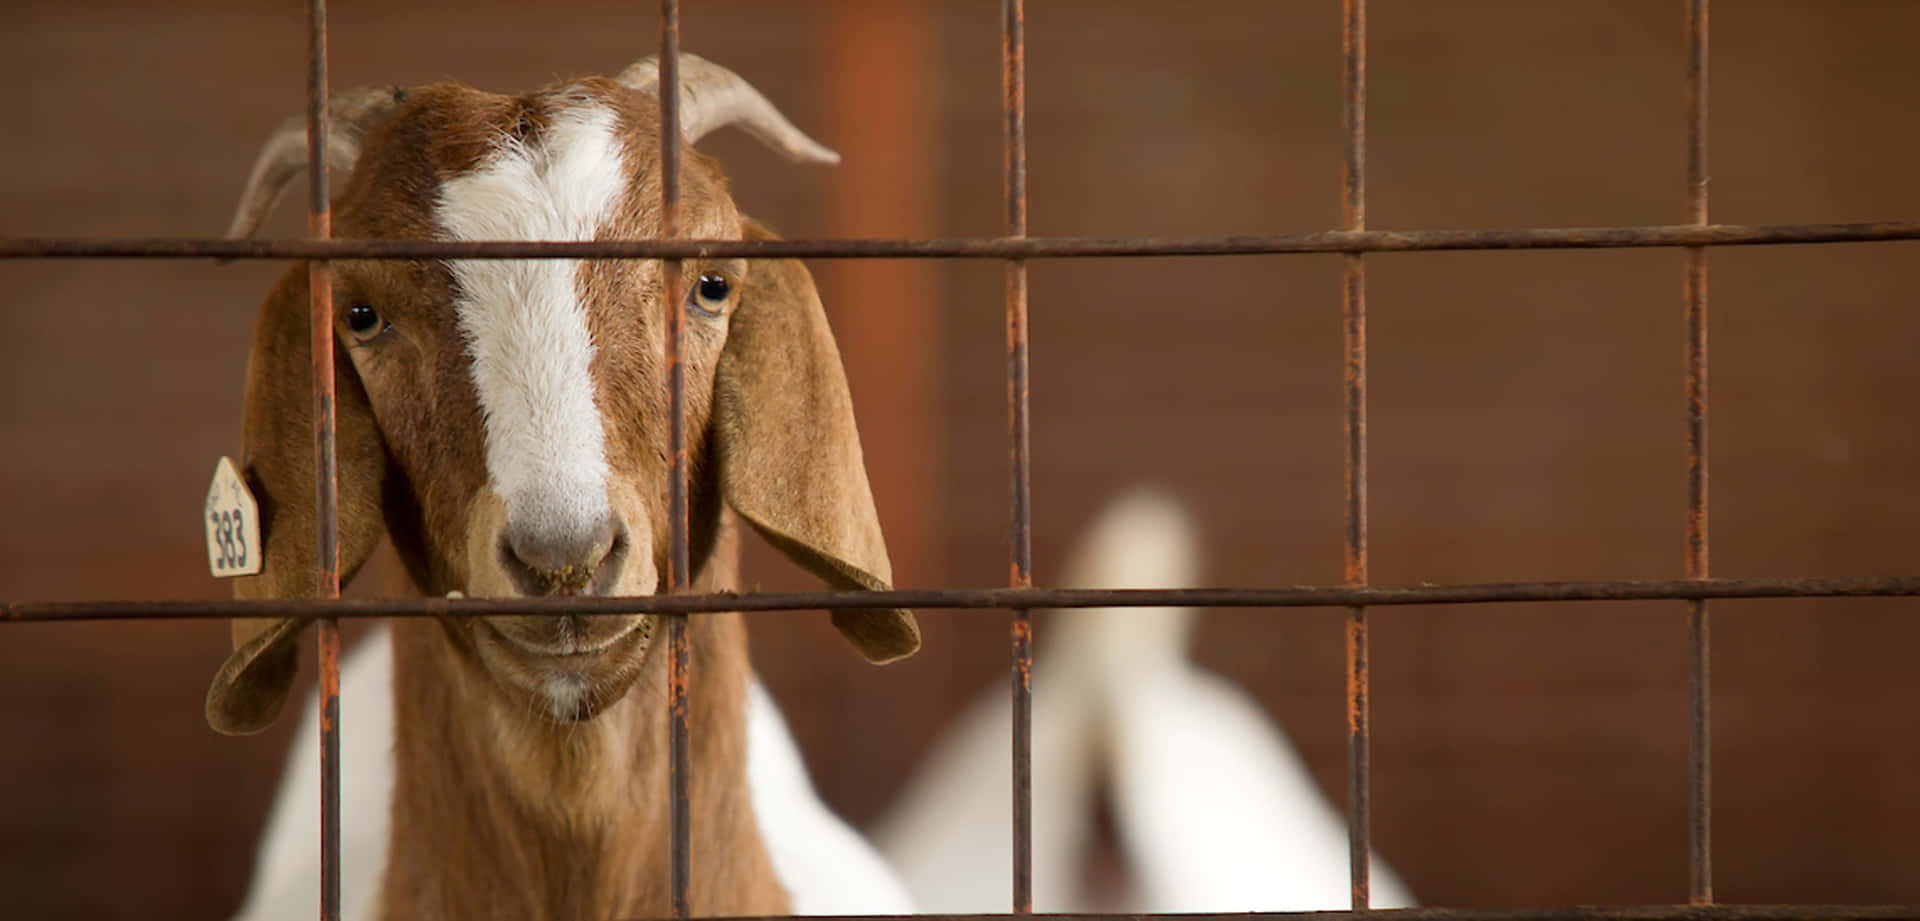 Goat In Cage Picture